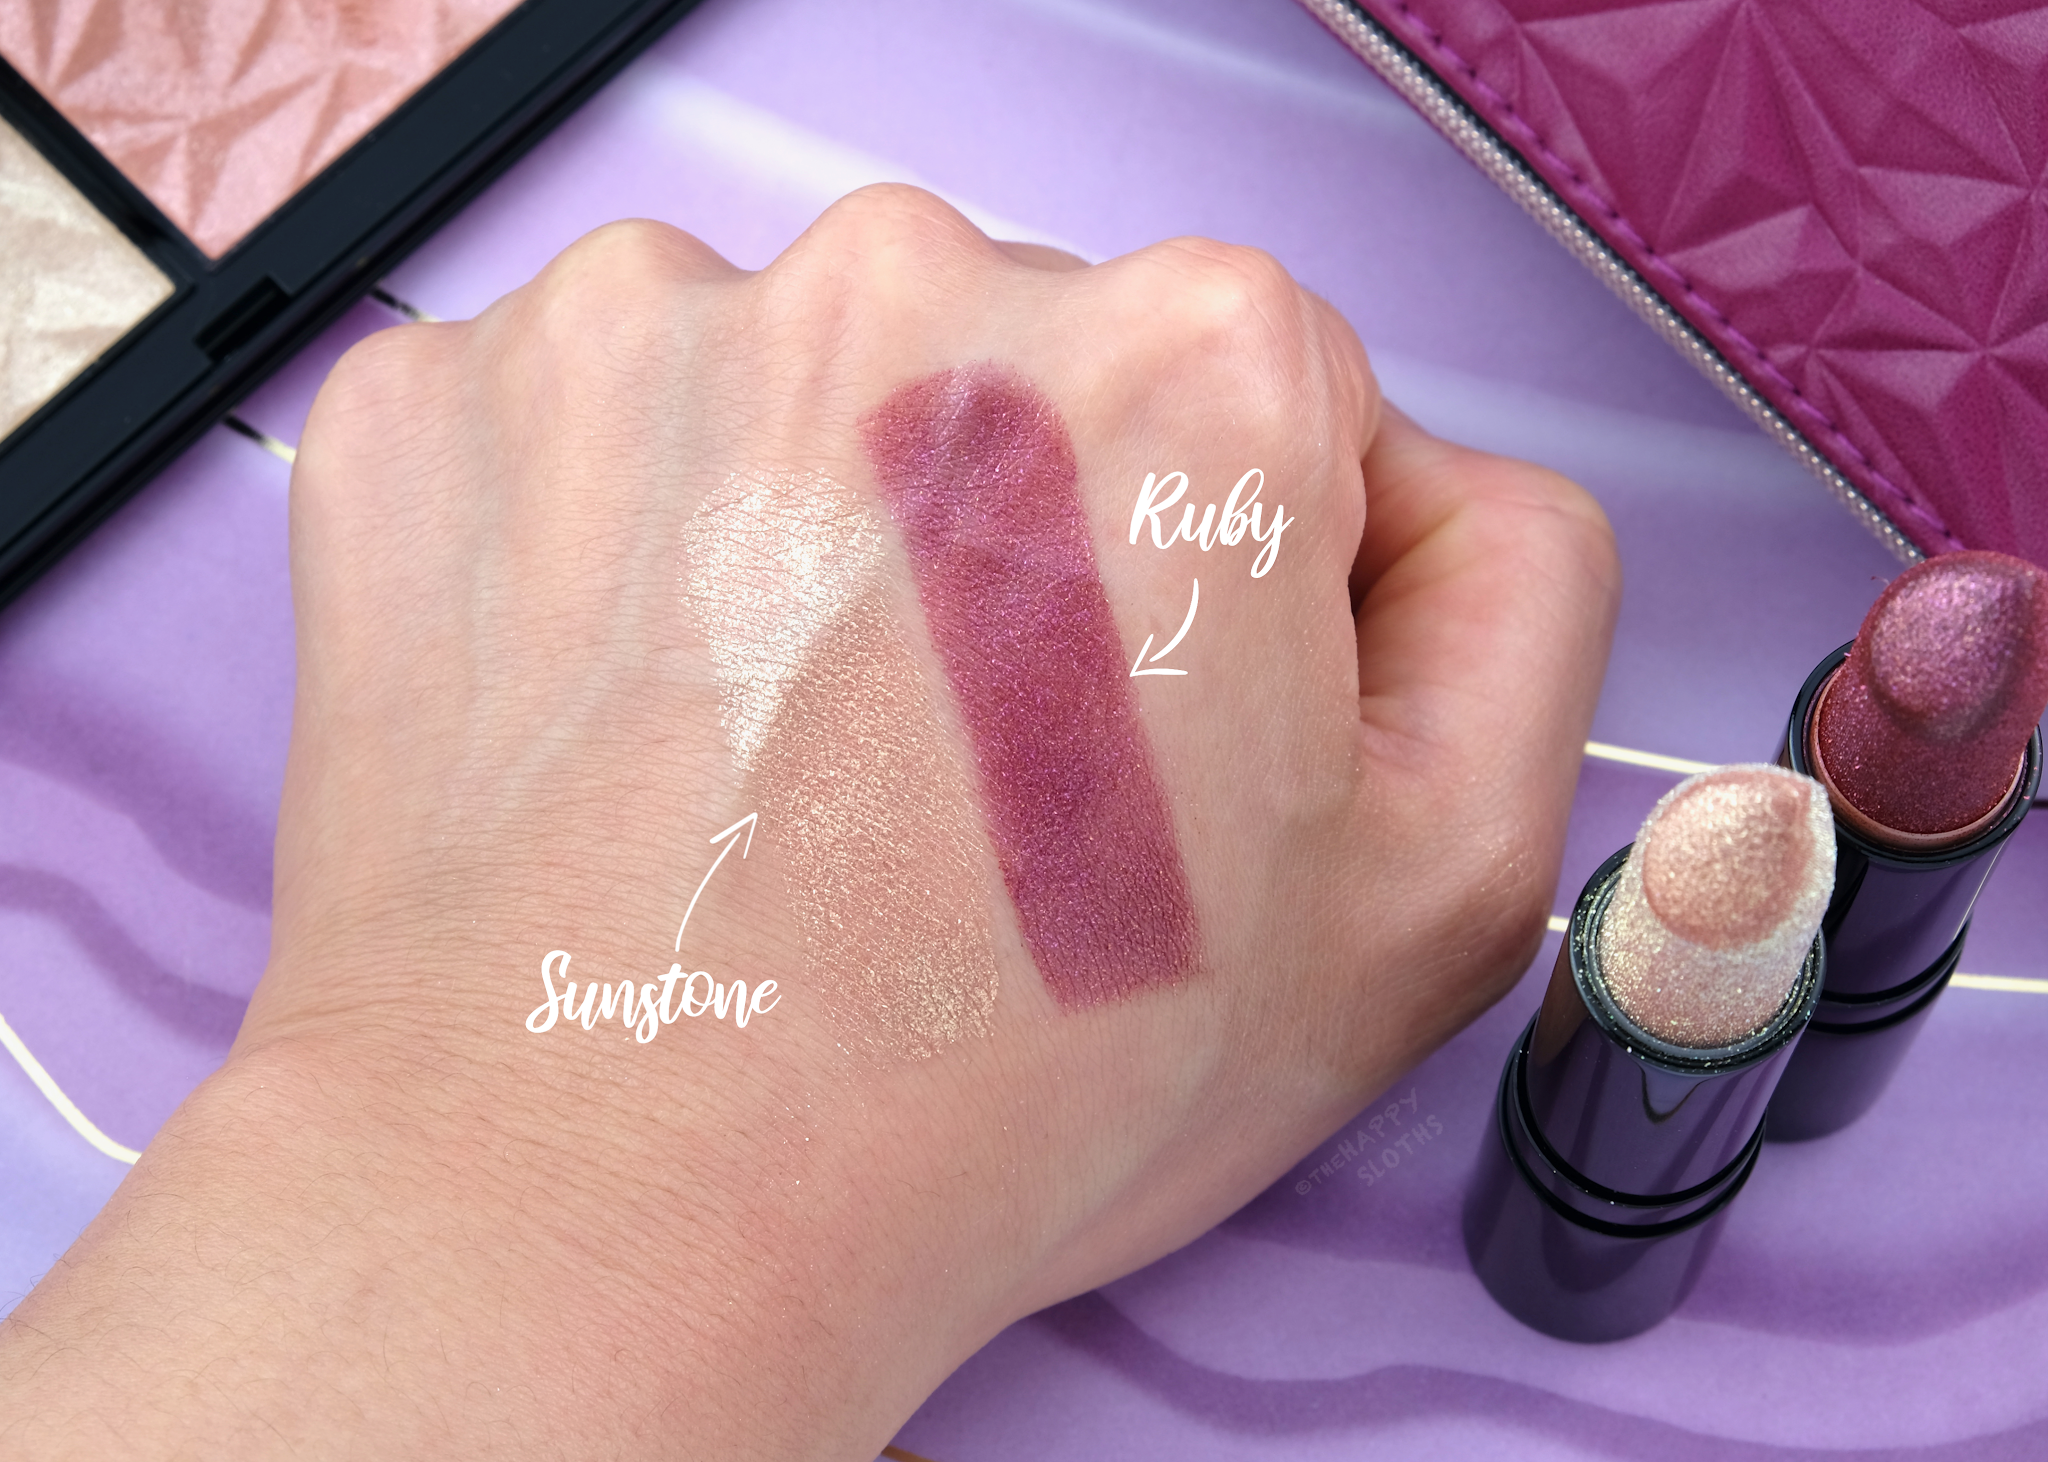 Mary Kay Fall 2021 | Sparkle Lipstick in "Sunstone" & "Ruby": Review and Swatches